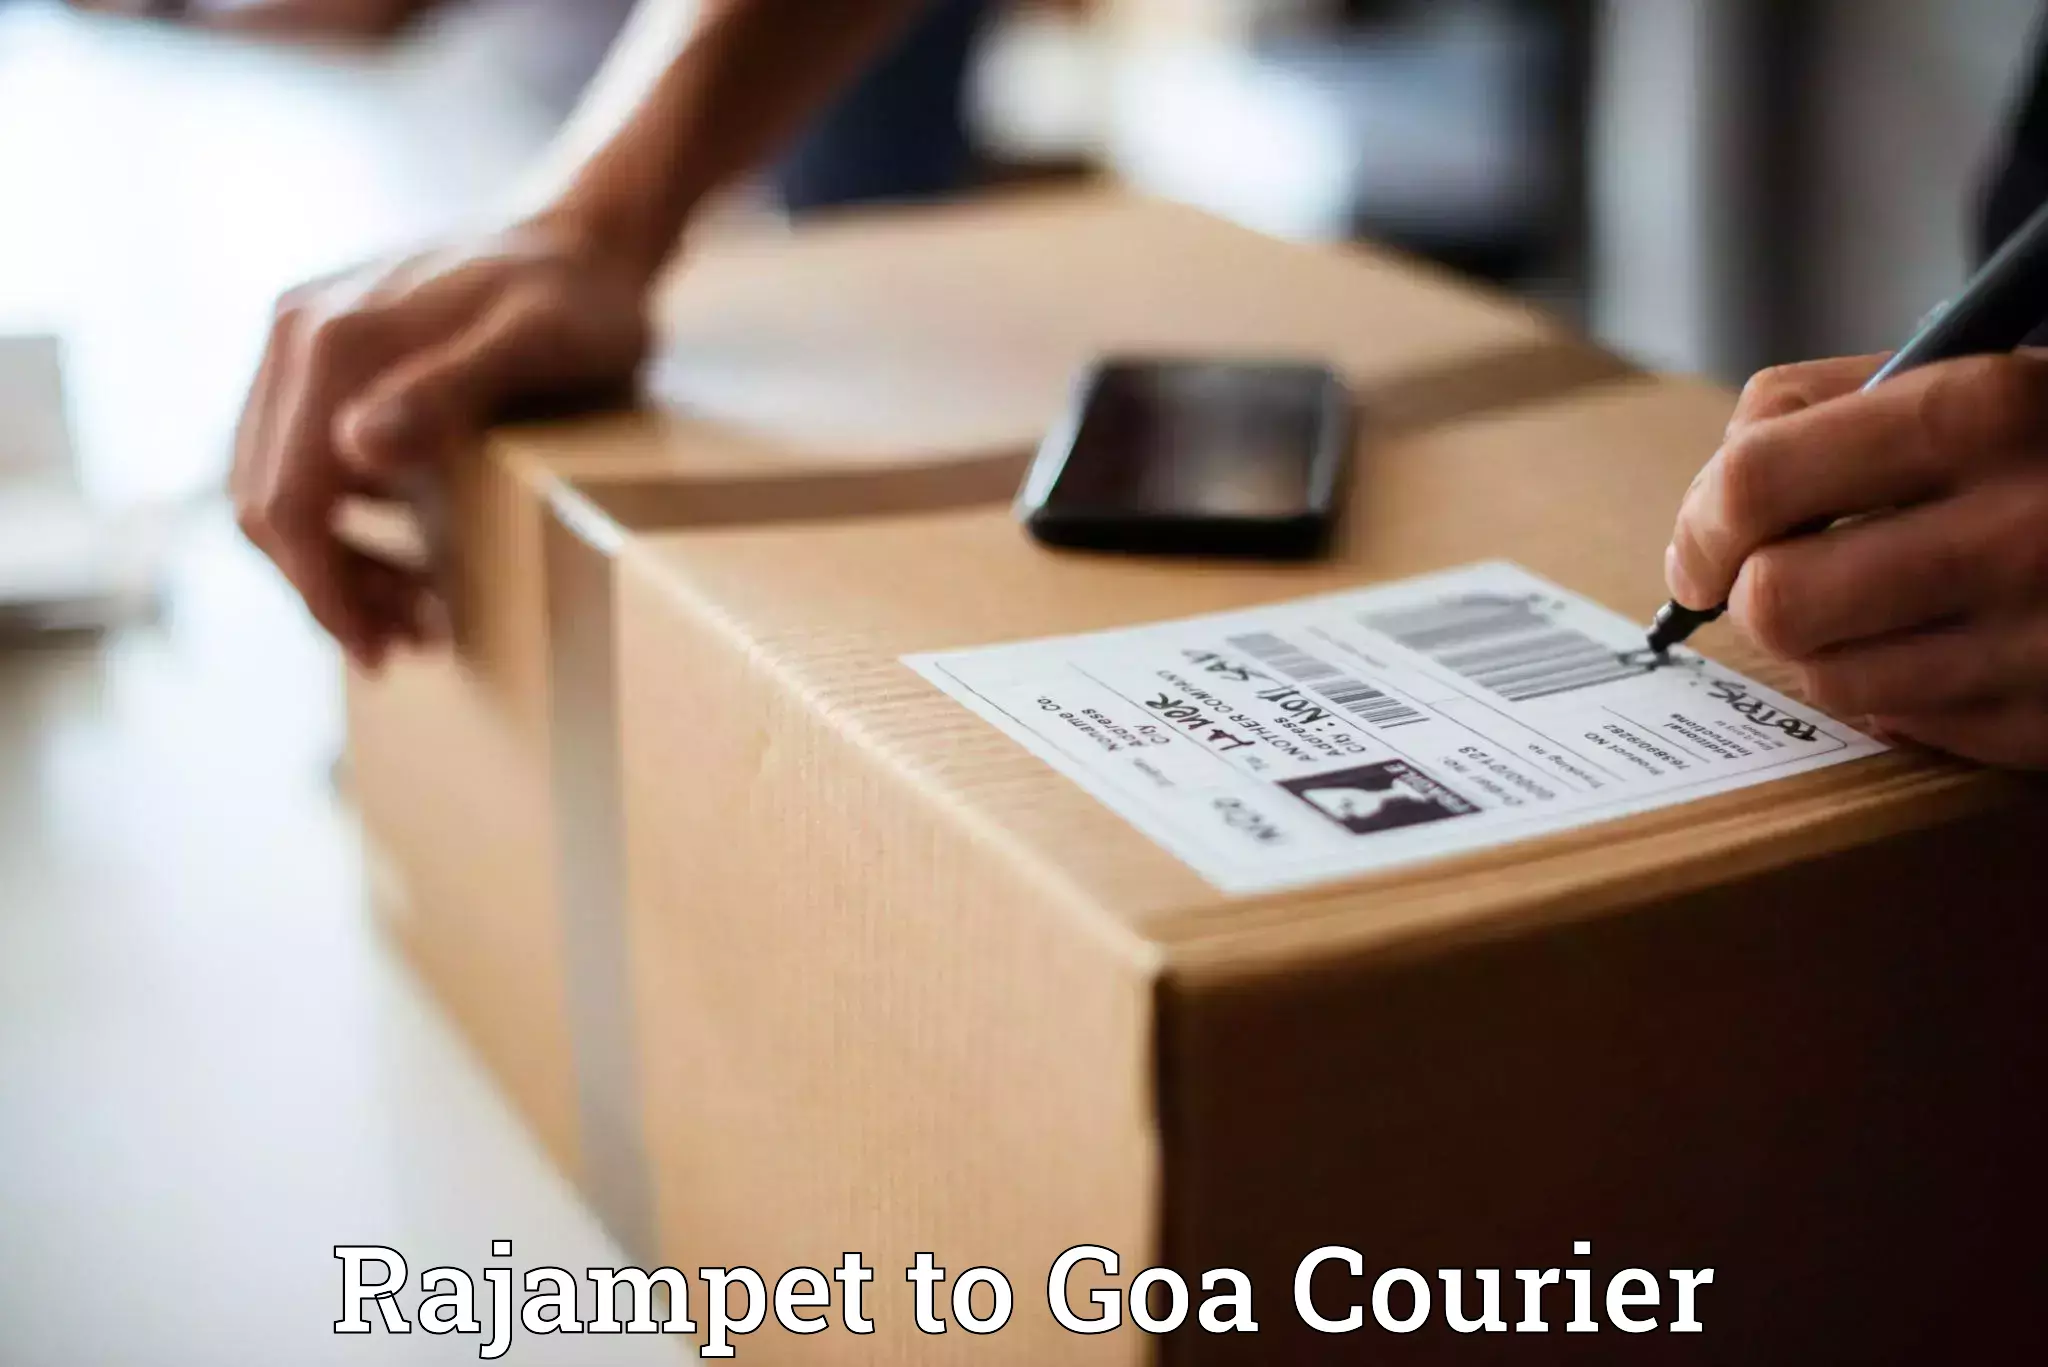 Sustainable shipping practices Rajampet to Goa